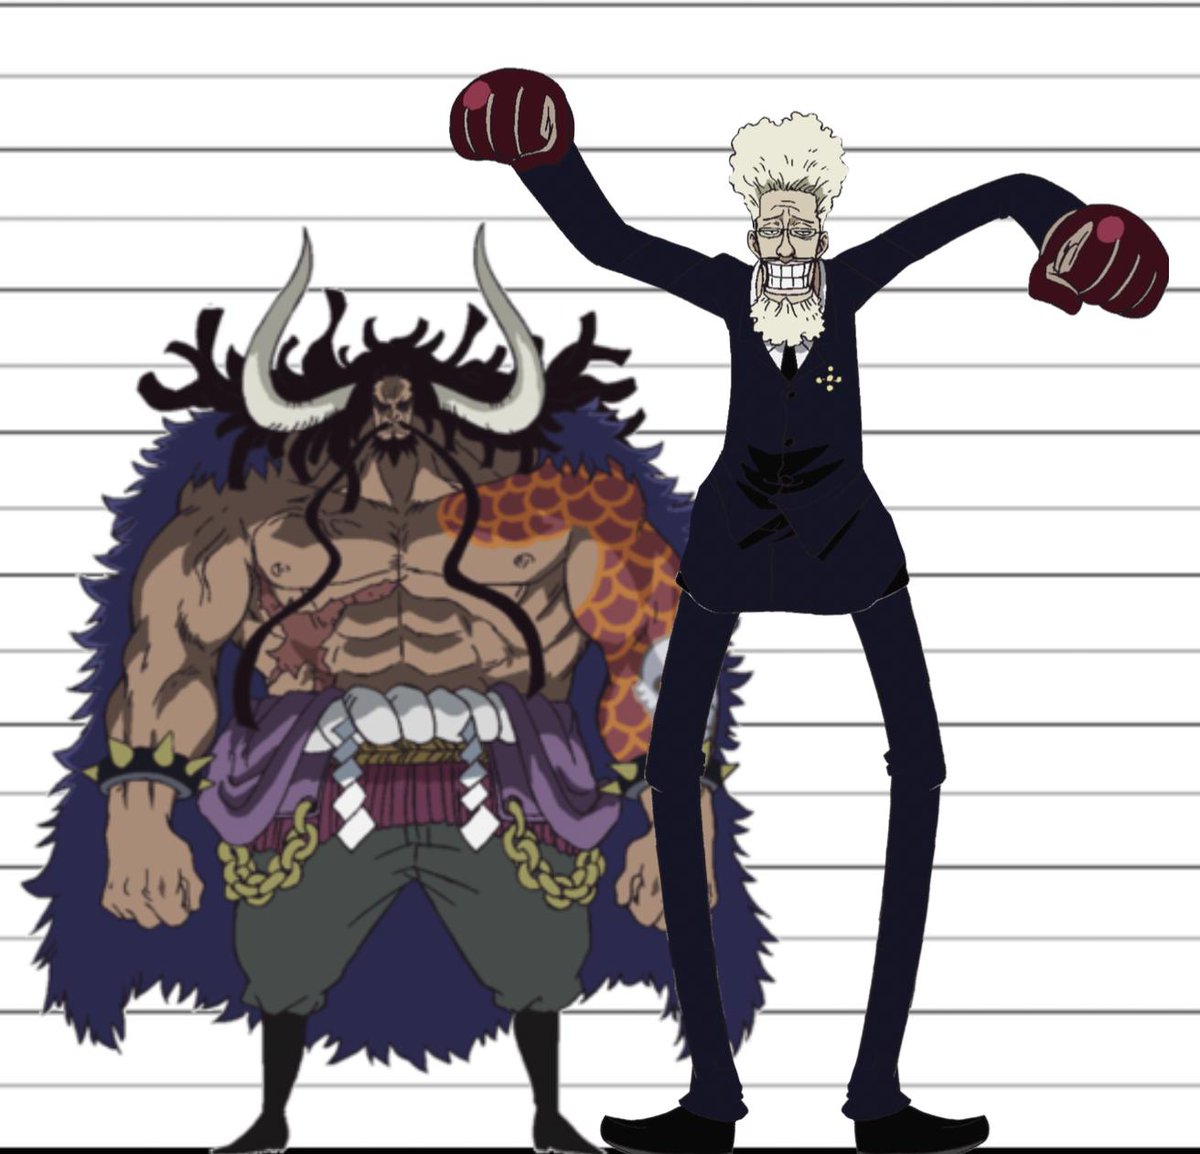 Artur Library Of Ohara In The Manga Jerry Does Legitimately Look This Tall If You Compare Him To Sanji He S Almost Four Times Taller Than Sanji Which Matches The